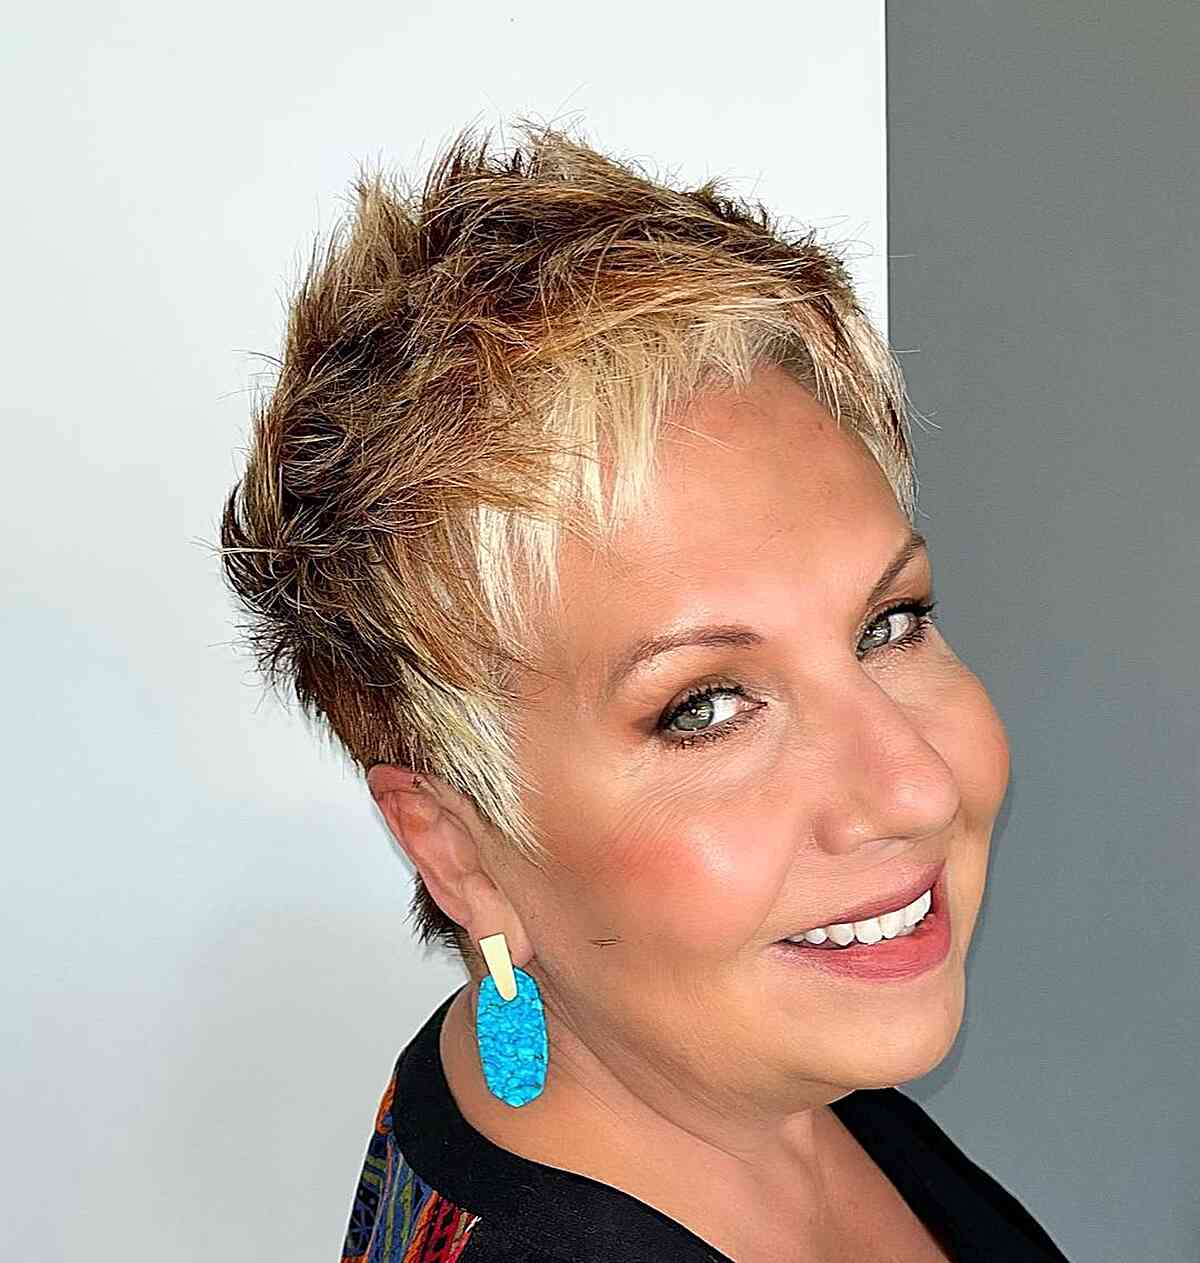 Choppy Fringe with a Spikey Top on a Choppy Pixie Cut for women with golden blonde hair